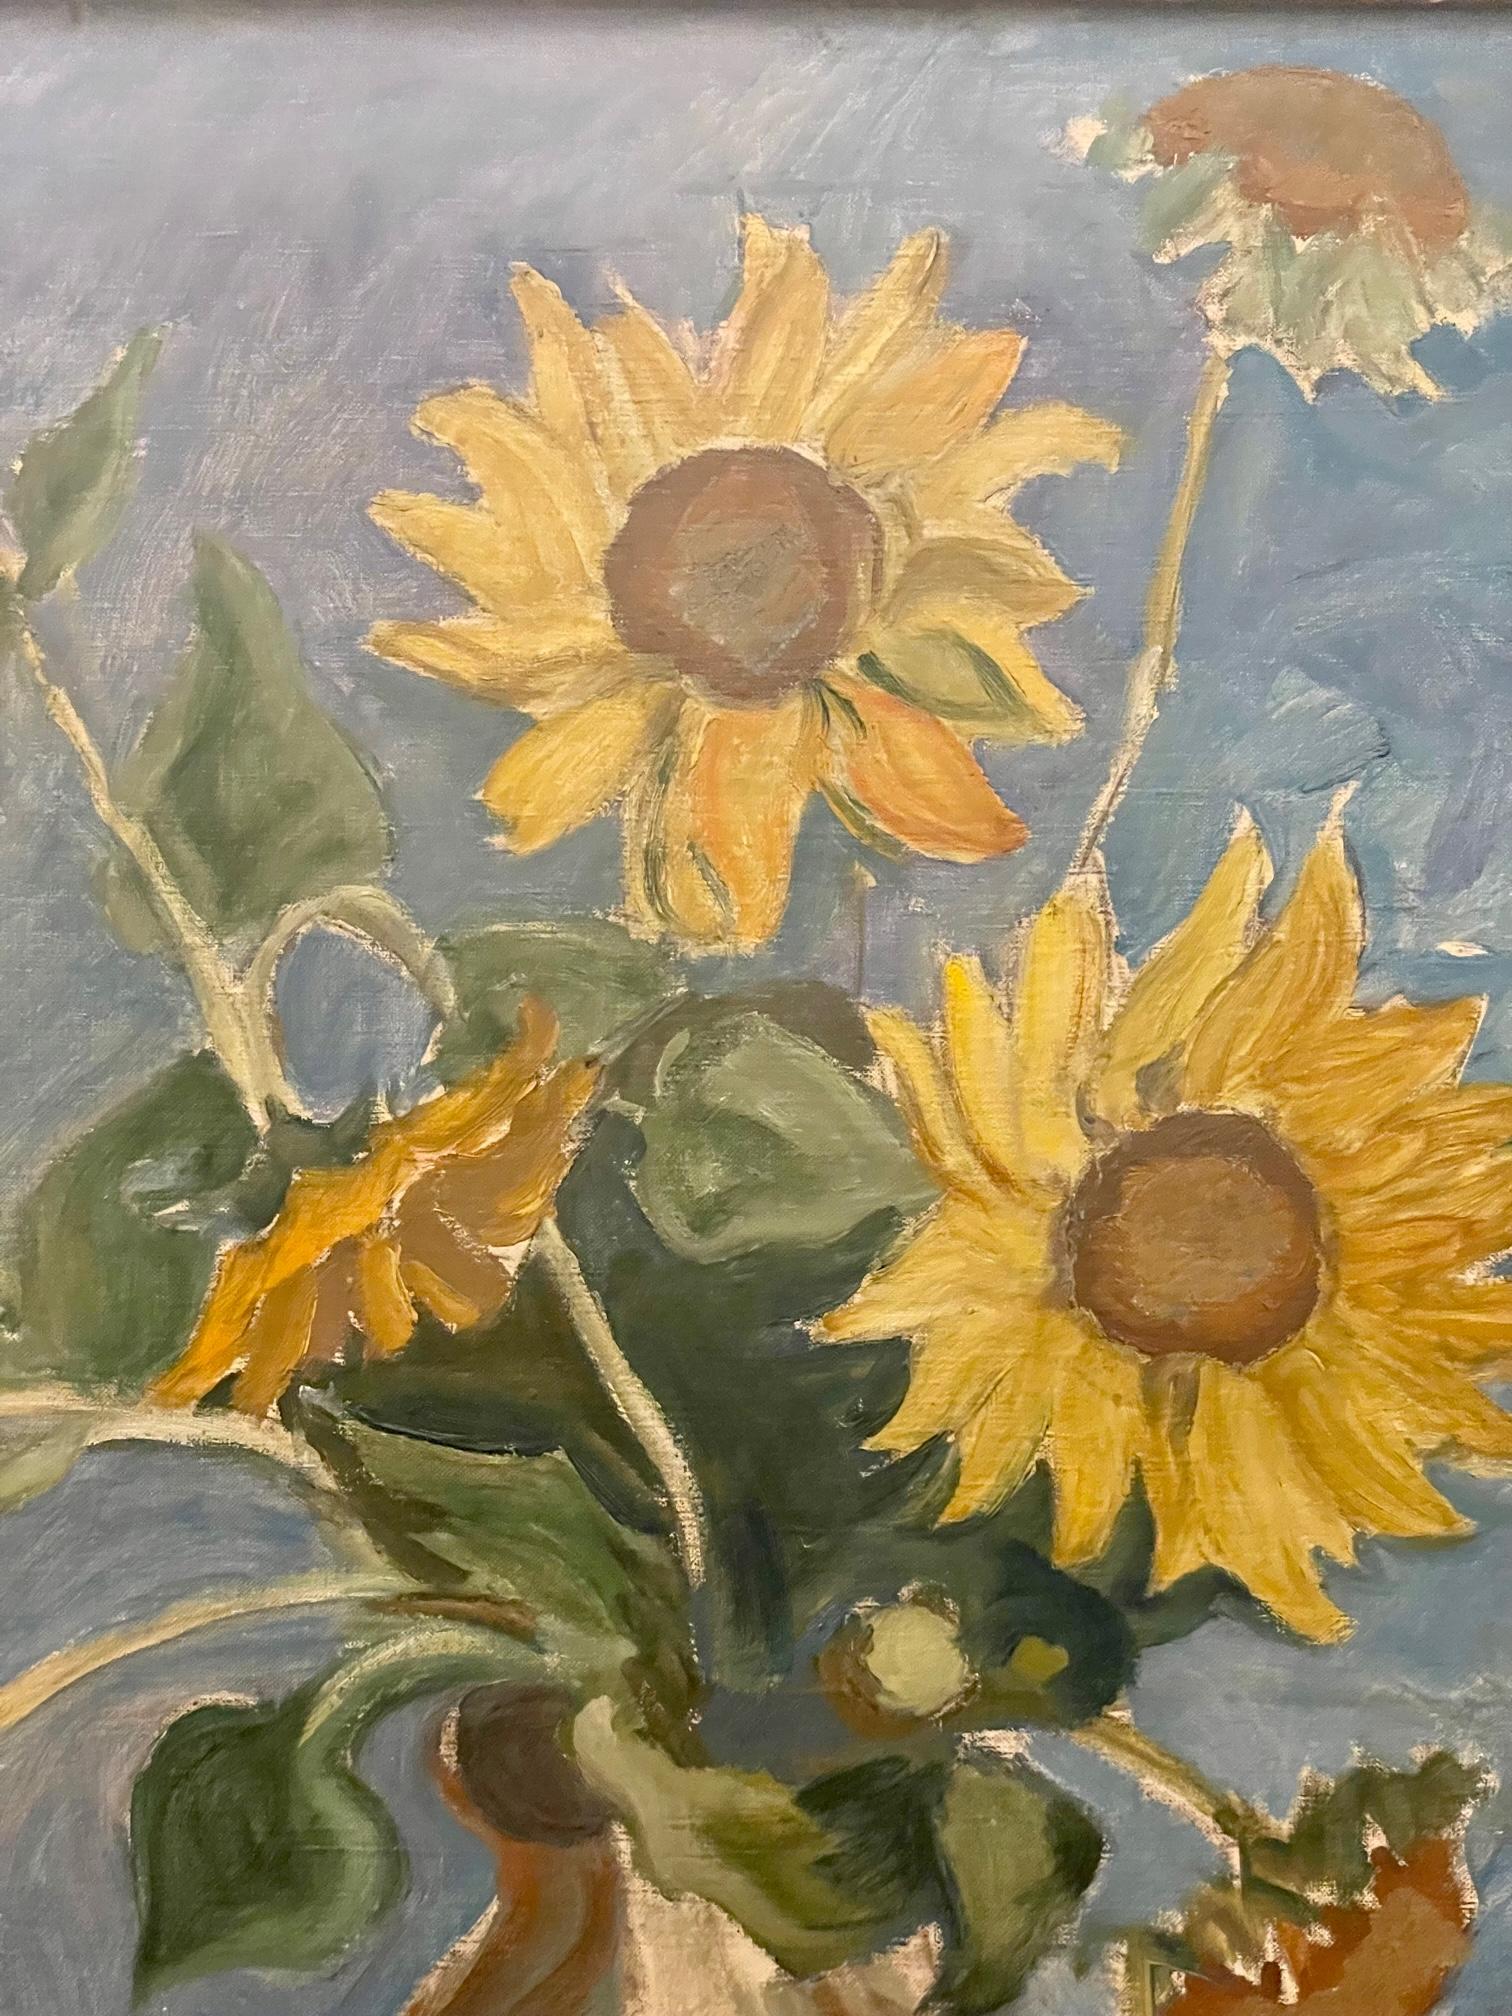 
'Sunflowers' post impressionism is in the Scottish Colourist tradition and art movement influenced by Cezanne in the early to mid 20th century.  The artist, John Maclauchlan Milne, is from a family of fine landscape artists. Milne started his